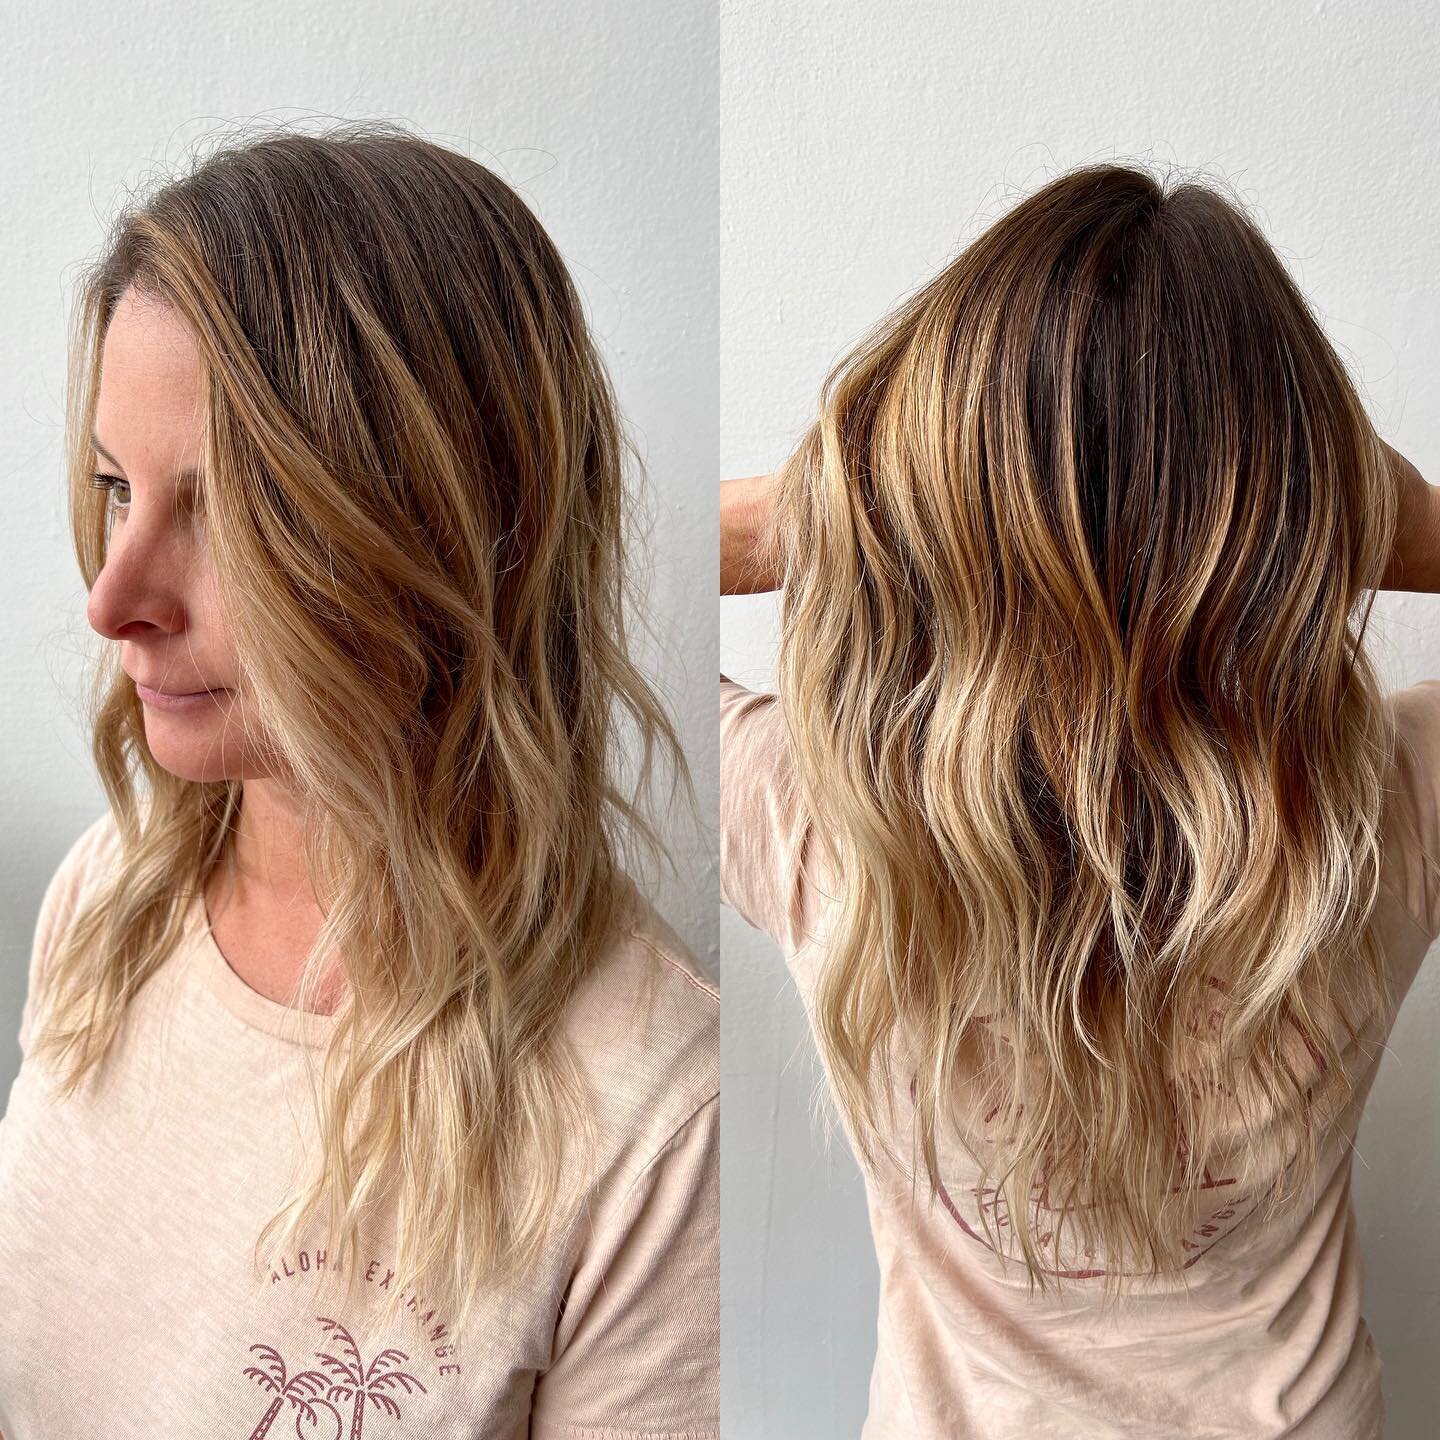 🎵🎶 People let me tell you &lsquo;bout my best friend&hellip;.&rsquo;s hair. It&rsquo;s a balayage. We did a balayage. (Over her preexisting balayage. So, really we just refreshed it, but it looks a lot better, okay?)
&bull;
&bull;
&bull;
&bull;
&bu